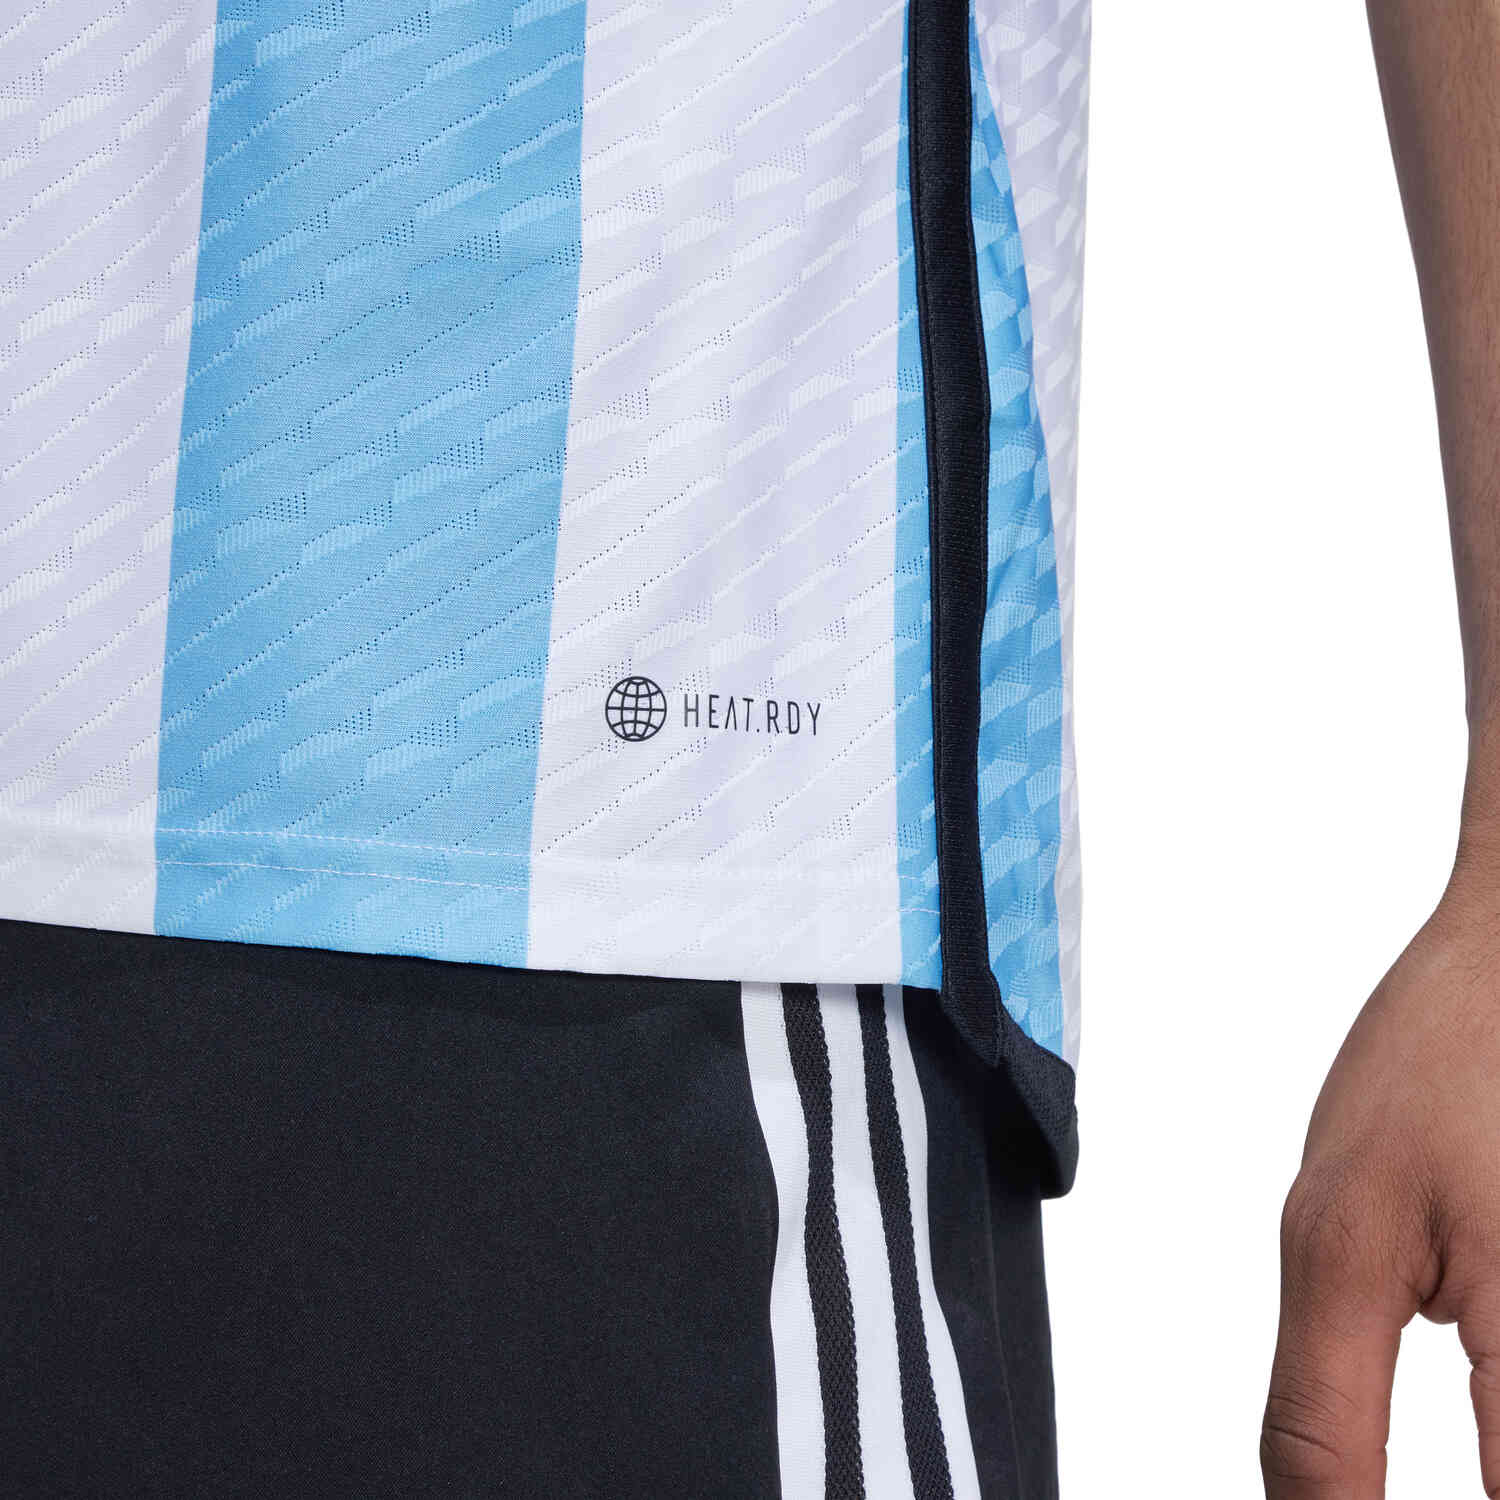 Men's Replica Adidas Argentina 2022 Champions Home Jersey - Size 2XL